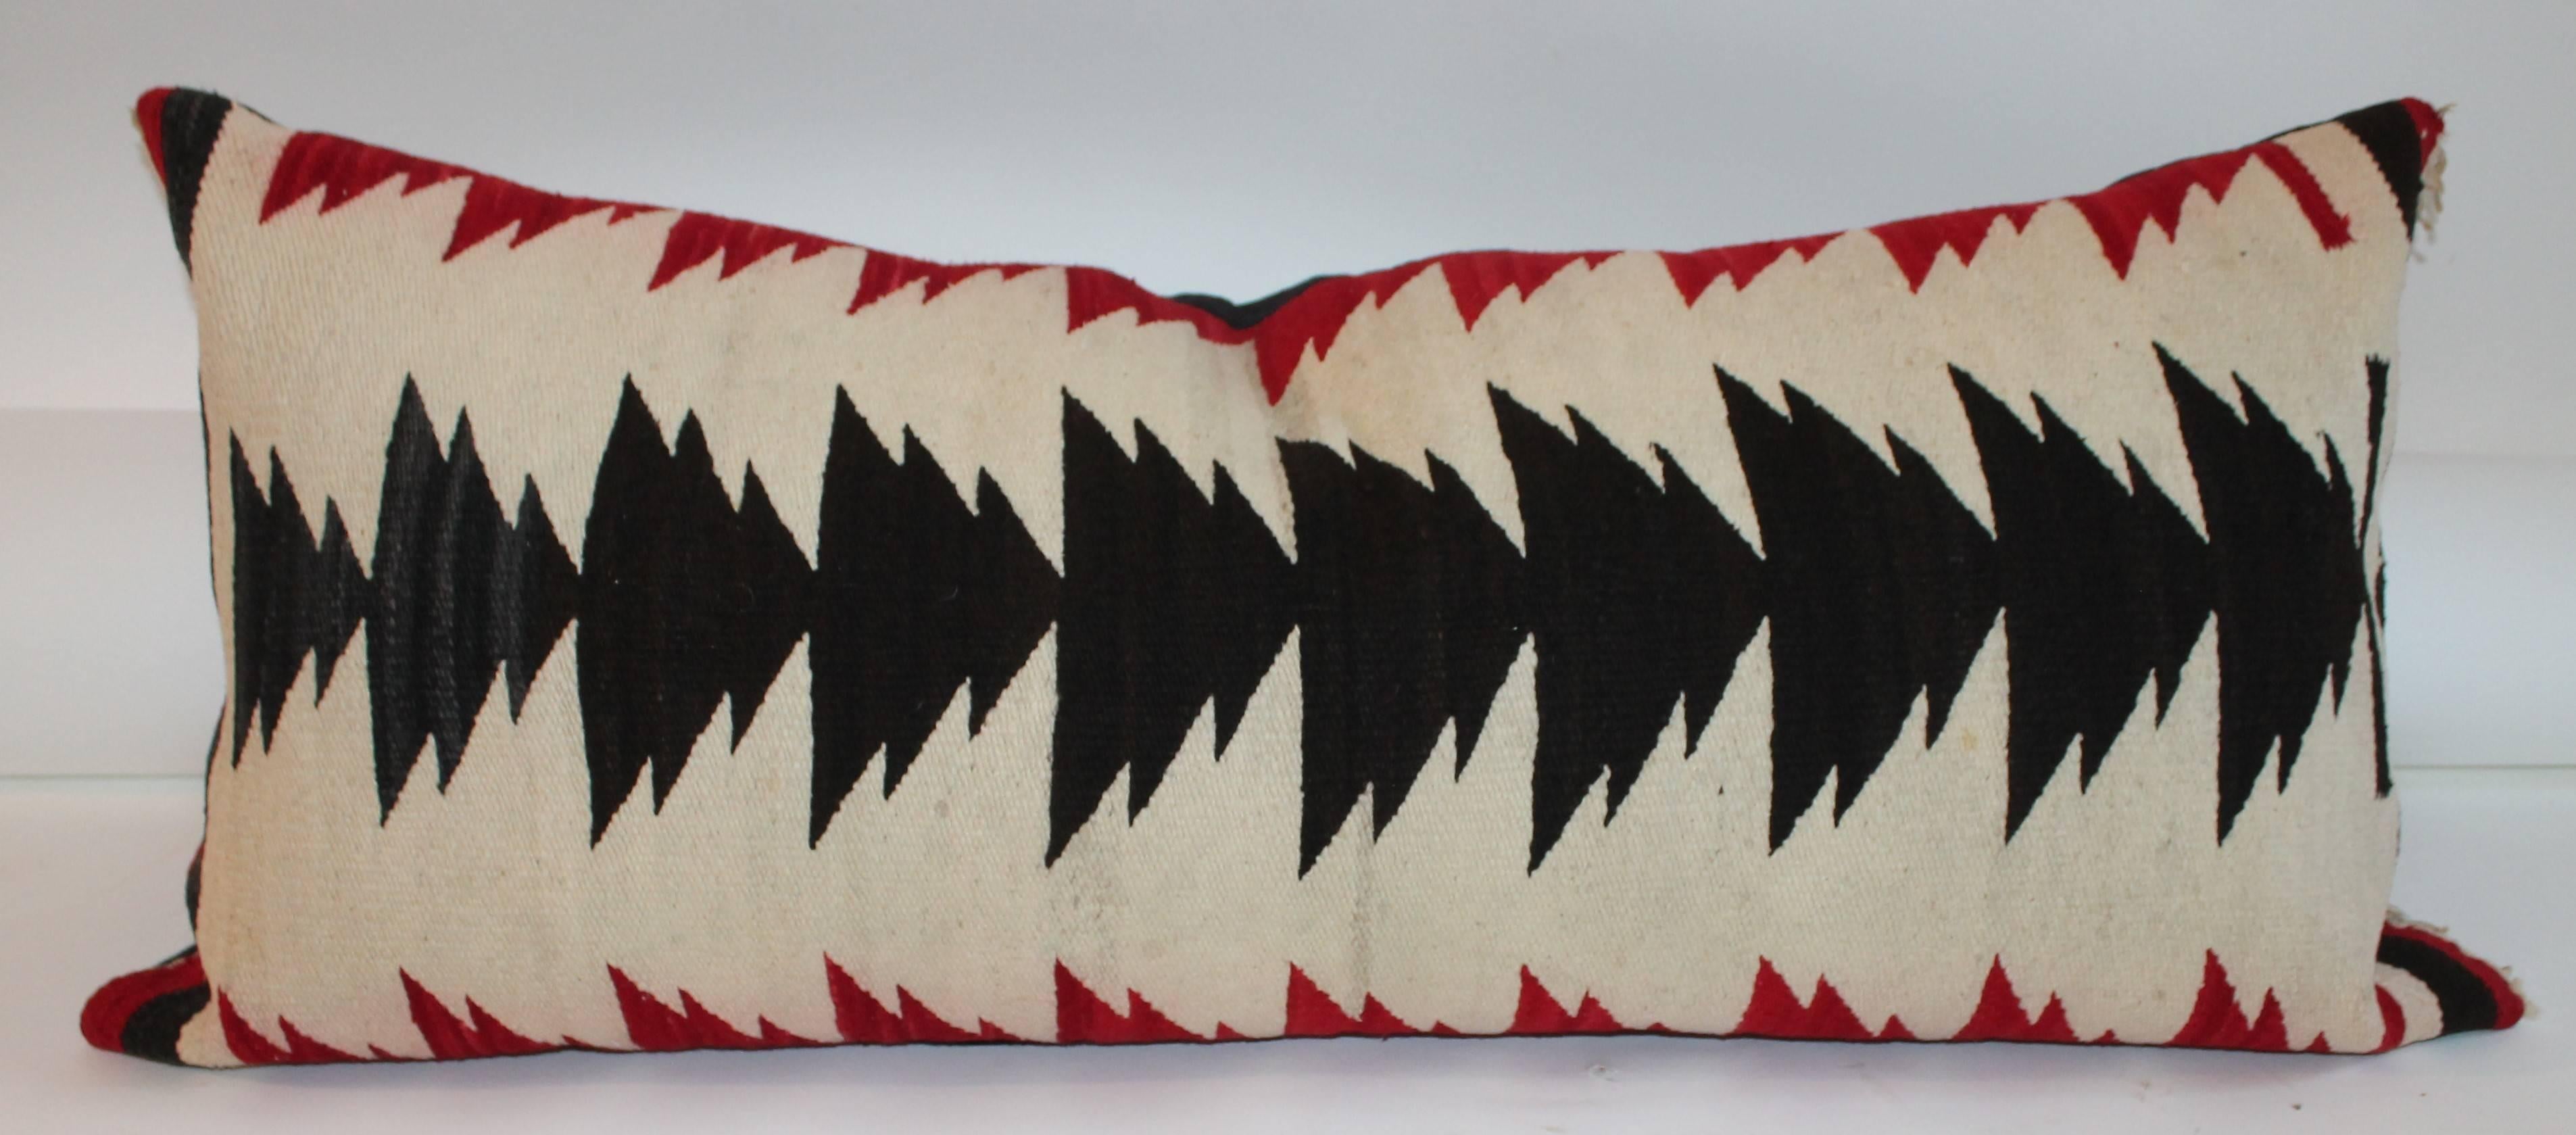 This group or collection of Navajo Saddle blanket weaving's bolster pillows. They are all in vibrant black and red with cream colors. The condition are very good. Bolster sizes are as follows : #1 18 x 35 #2 19 x 40 #3 20 x 40 #4 18 x 32.